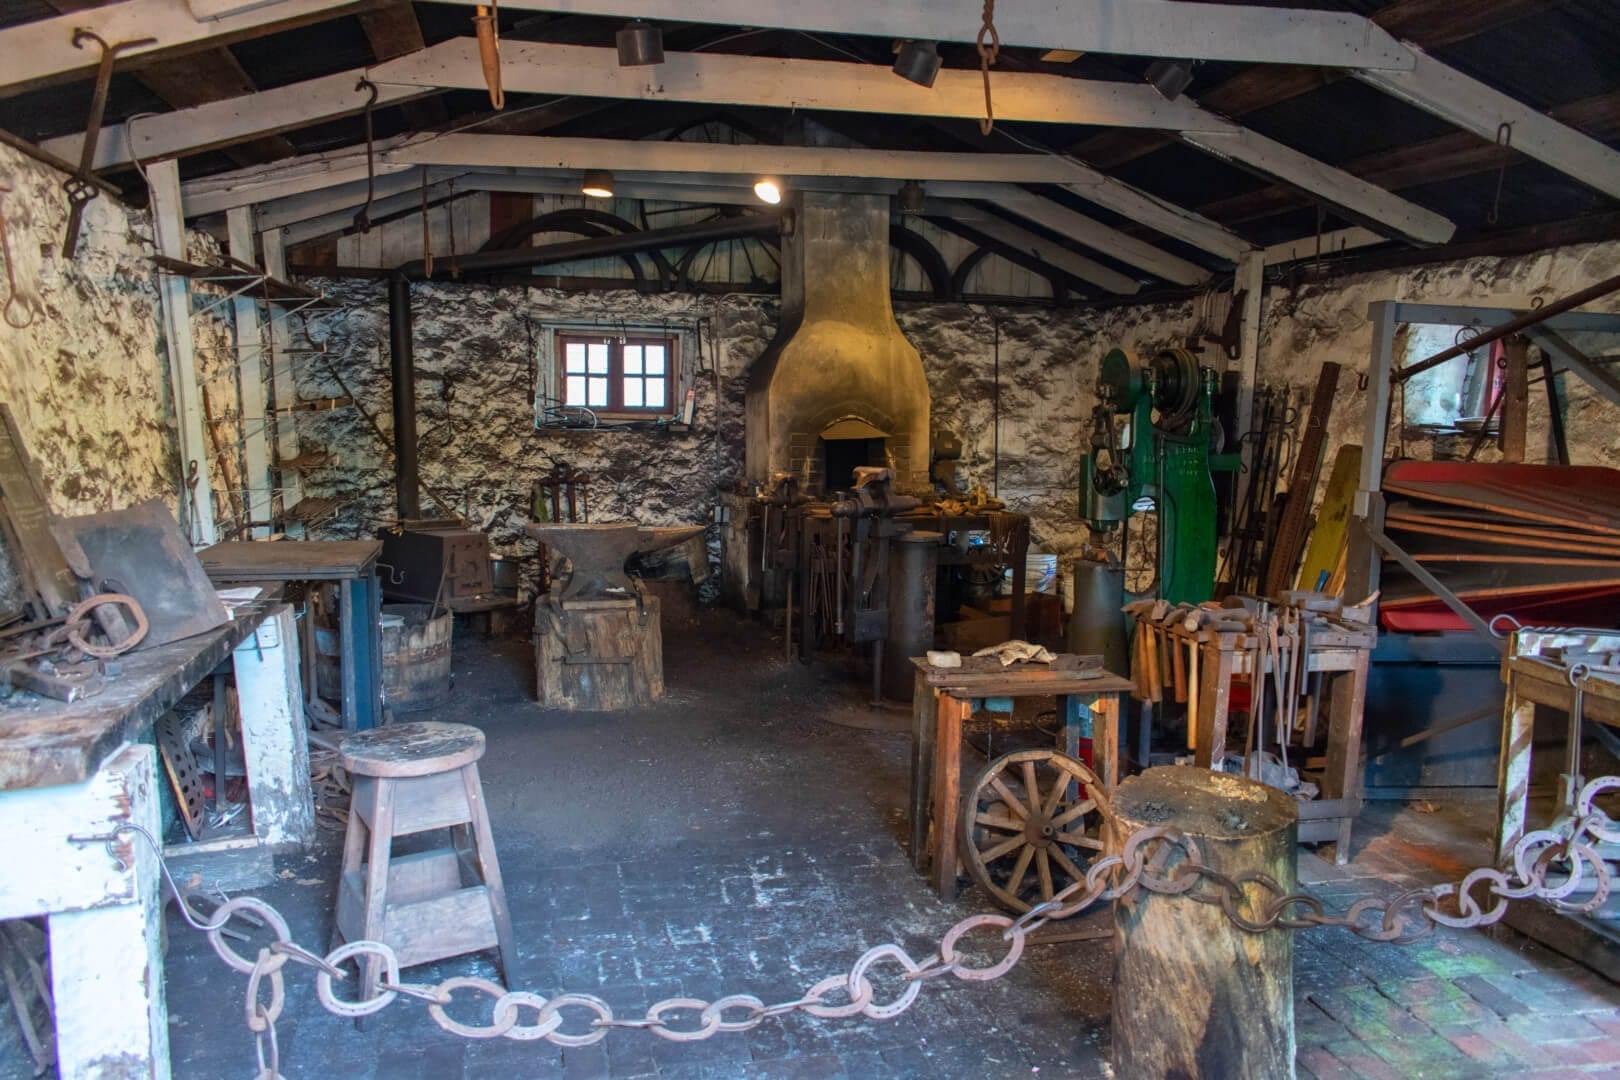 Jersey Through History at The Red Mill Museum Village